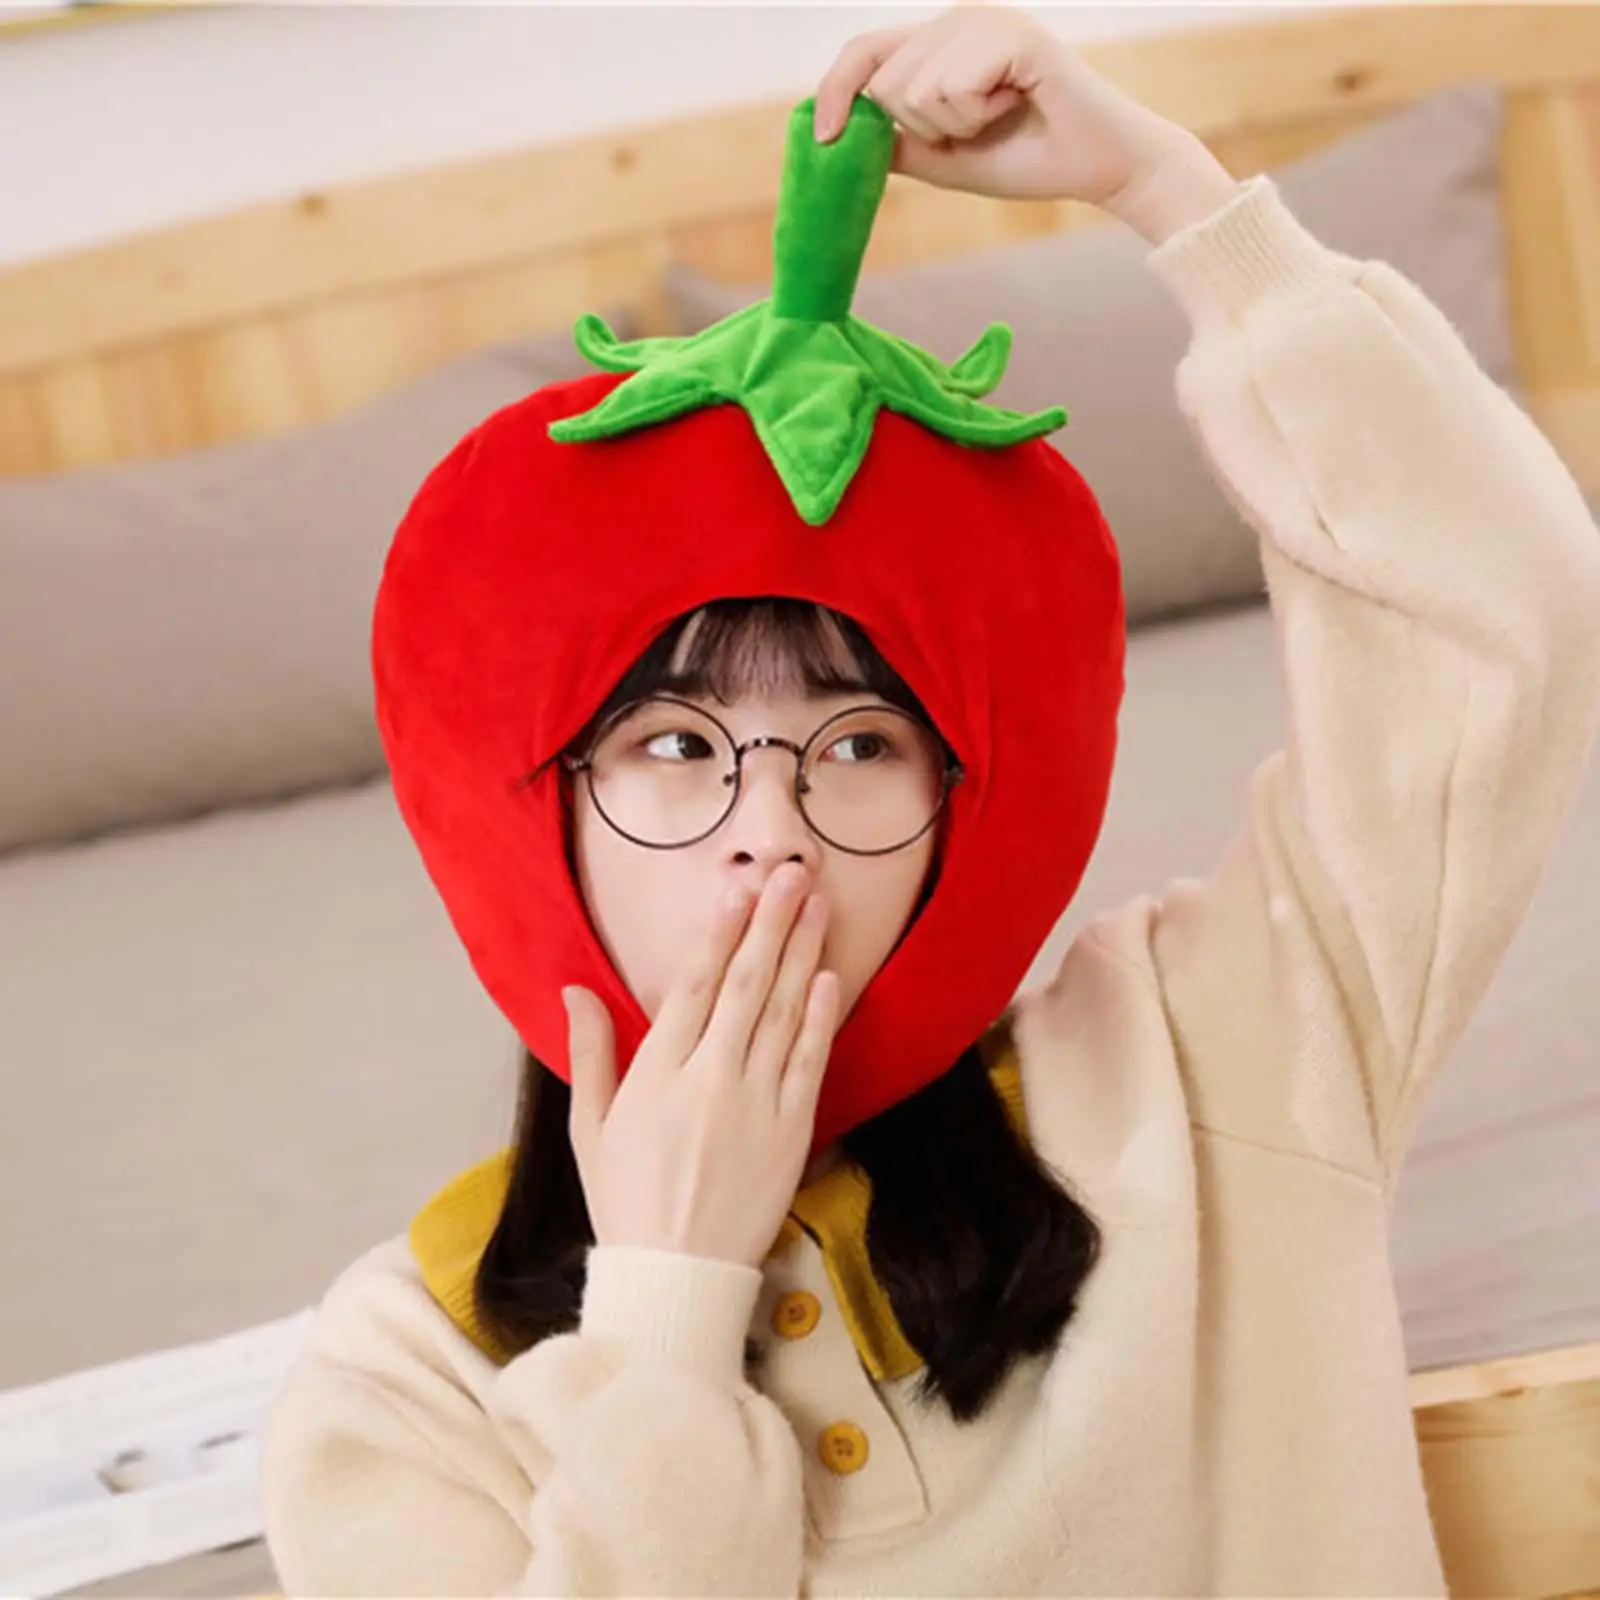 Cute Strawberry Headgear Sleeping Pillow Toy Hat for Halloween Holiday Gifts